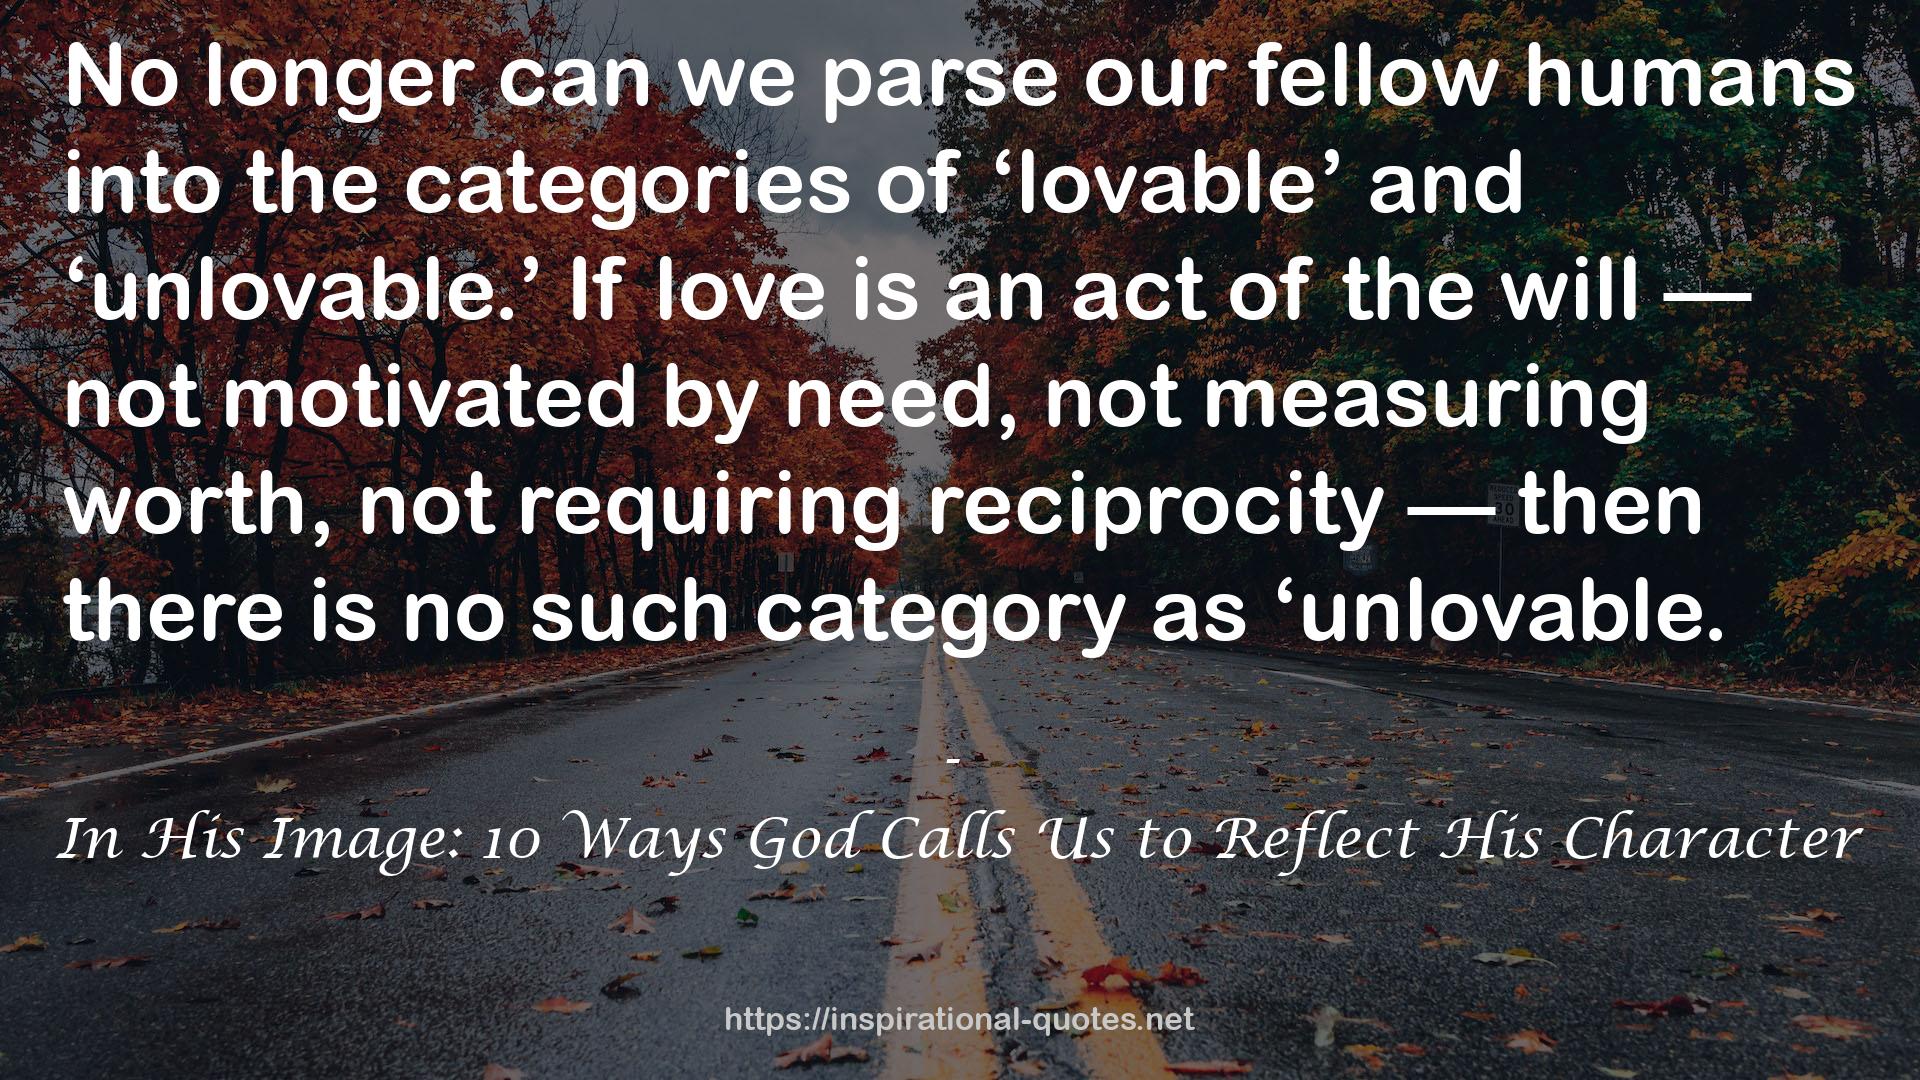 In His Image: 10 Ways God Calls Us to Reflect His Character QUOTES